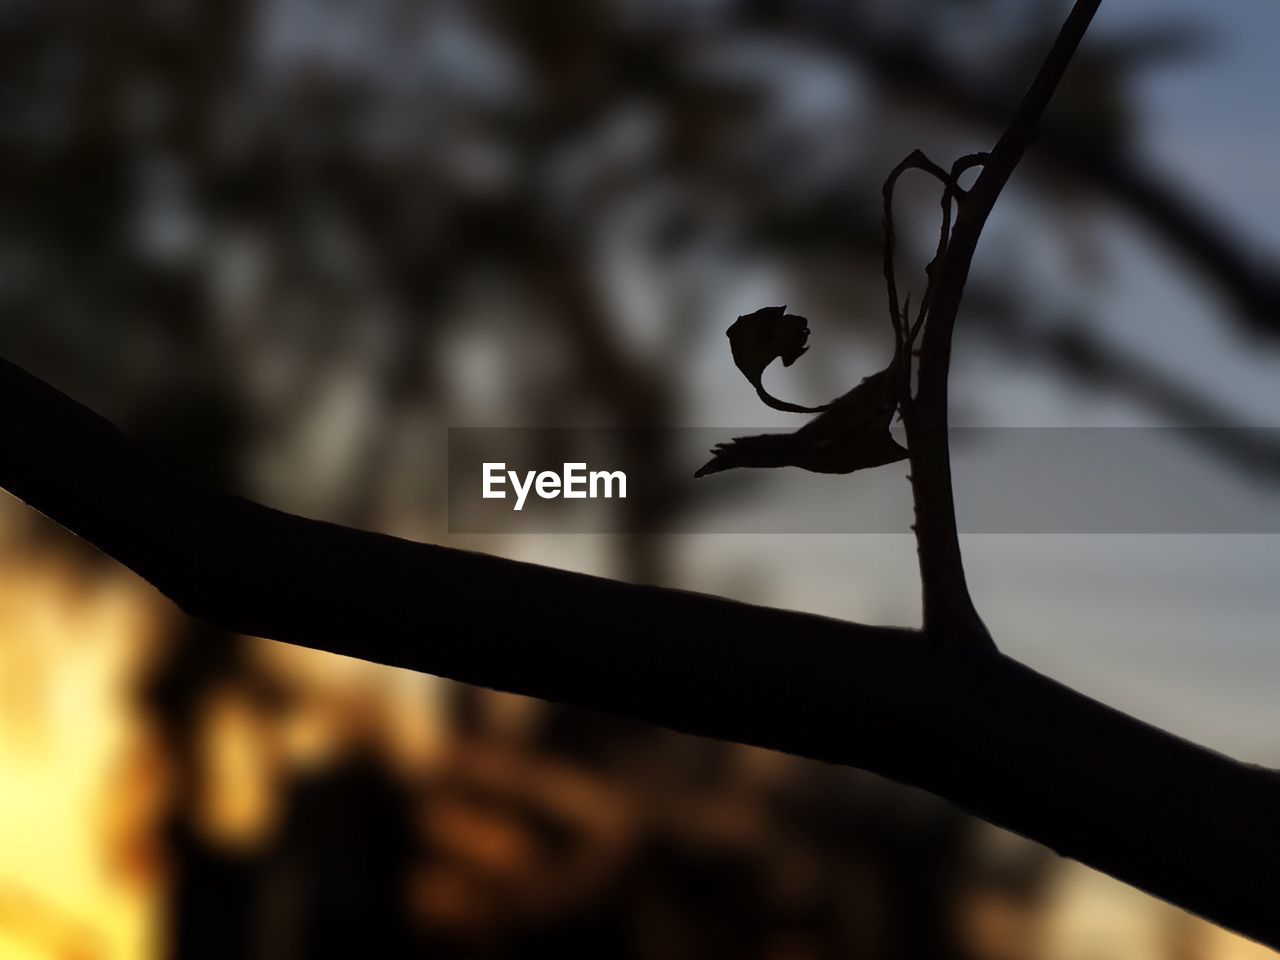 Silhouette of branch with dry leaf